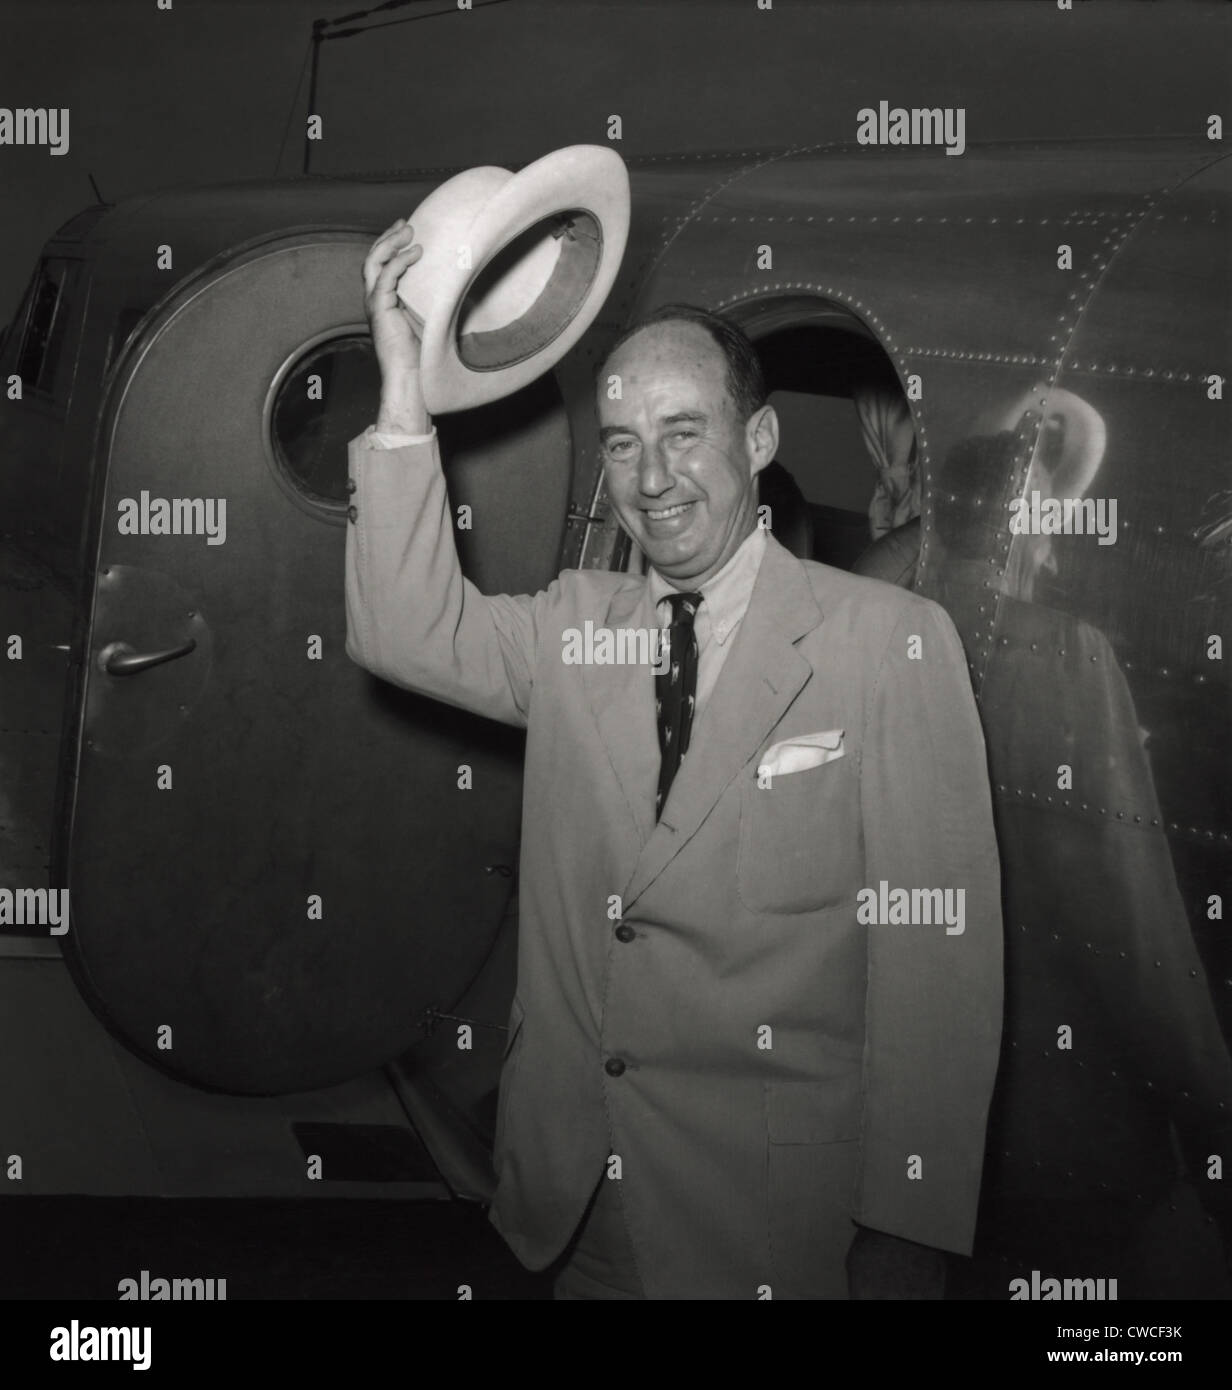 1952 presidential nominee Adlai Stevenson arriving at the Democratic National Convention, Chicago. After his defeat by Stock Photo